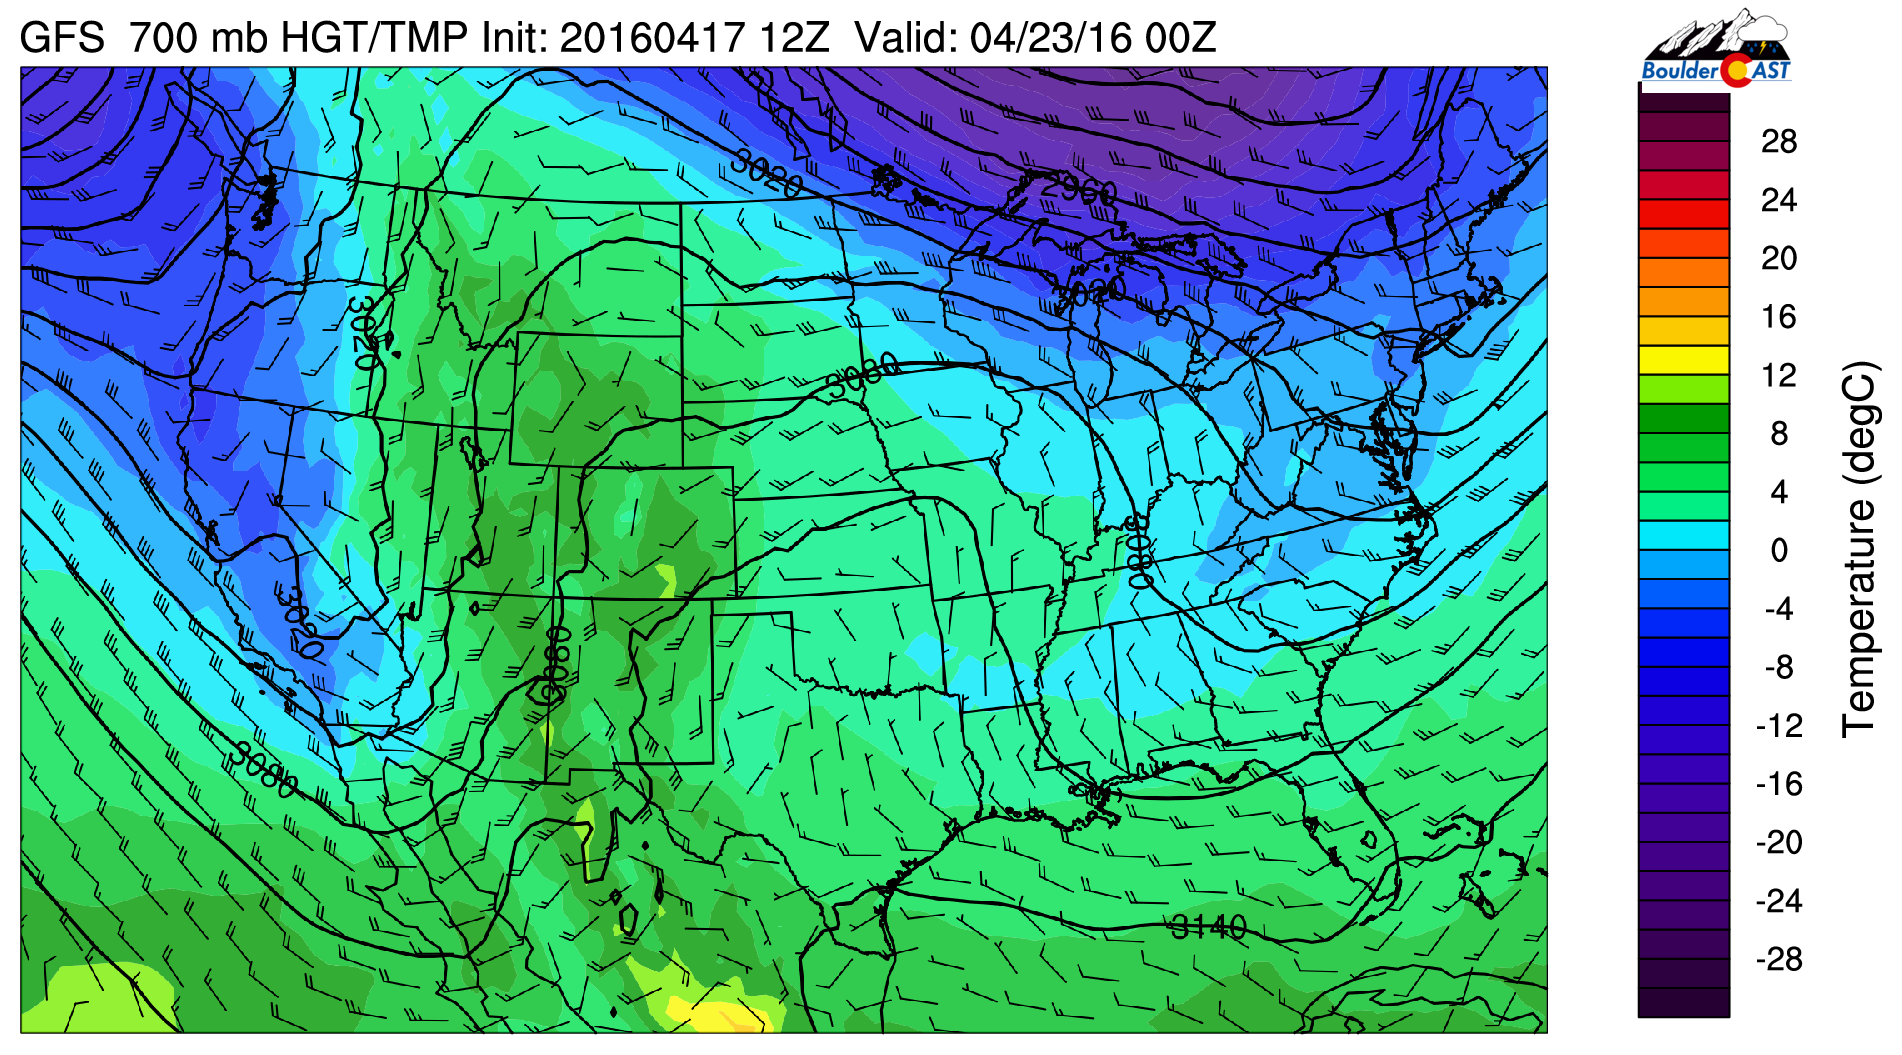 GFS 700 mb temperatures for Friday